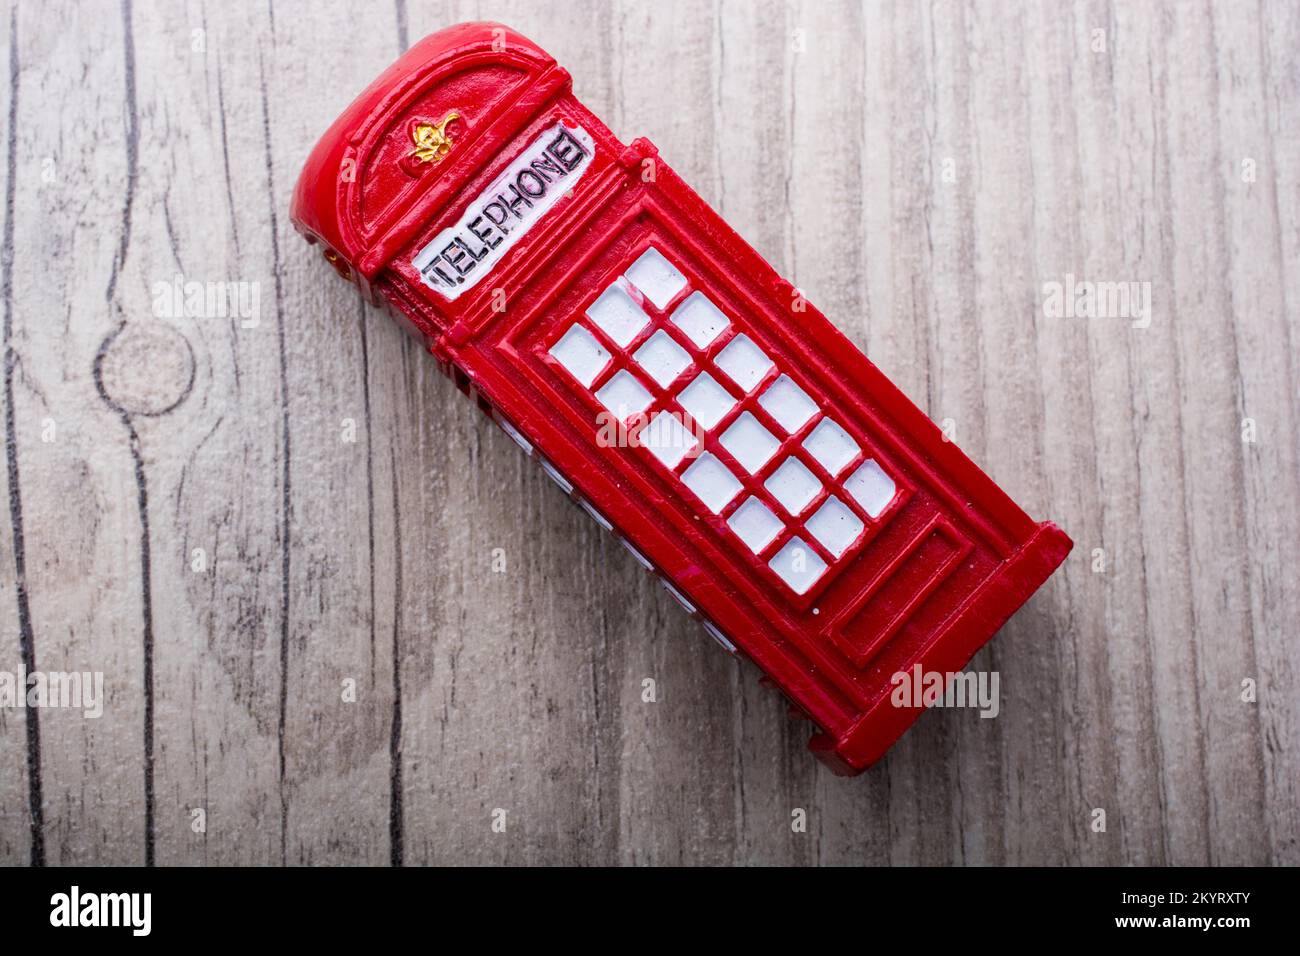 Red telepphone booth on a grey background Stock Photo